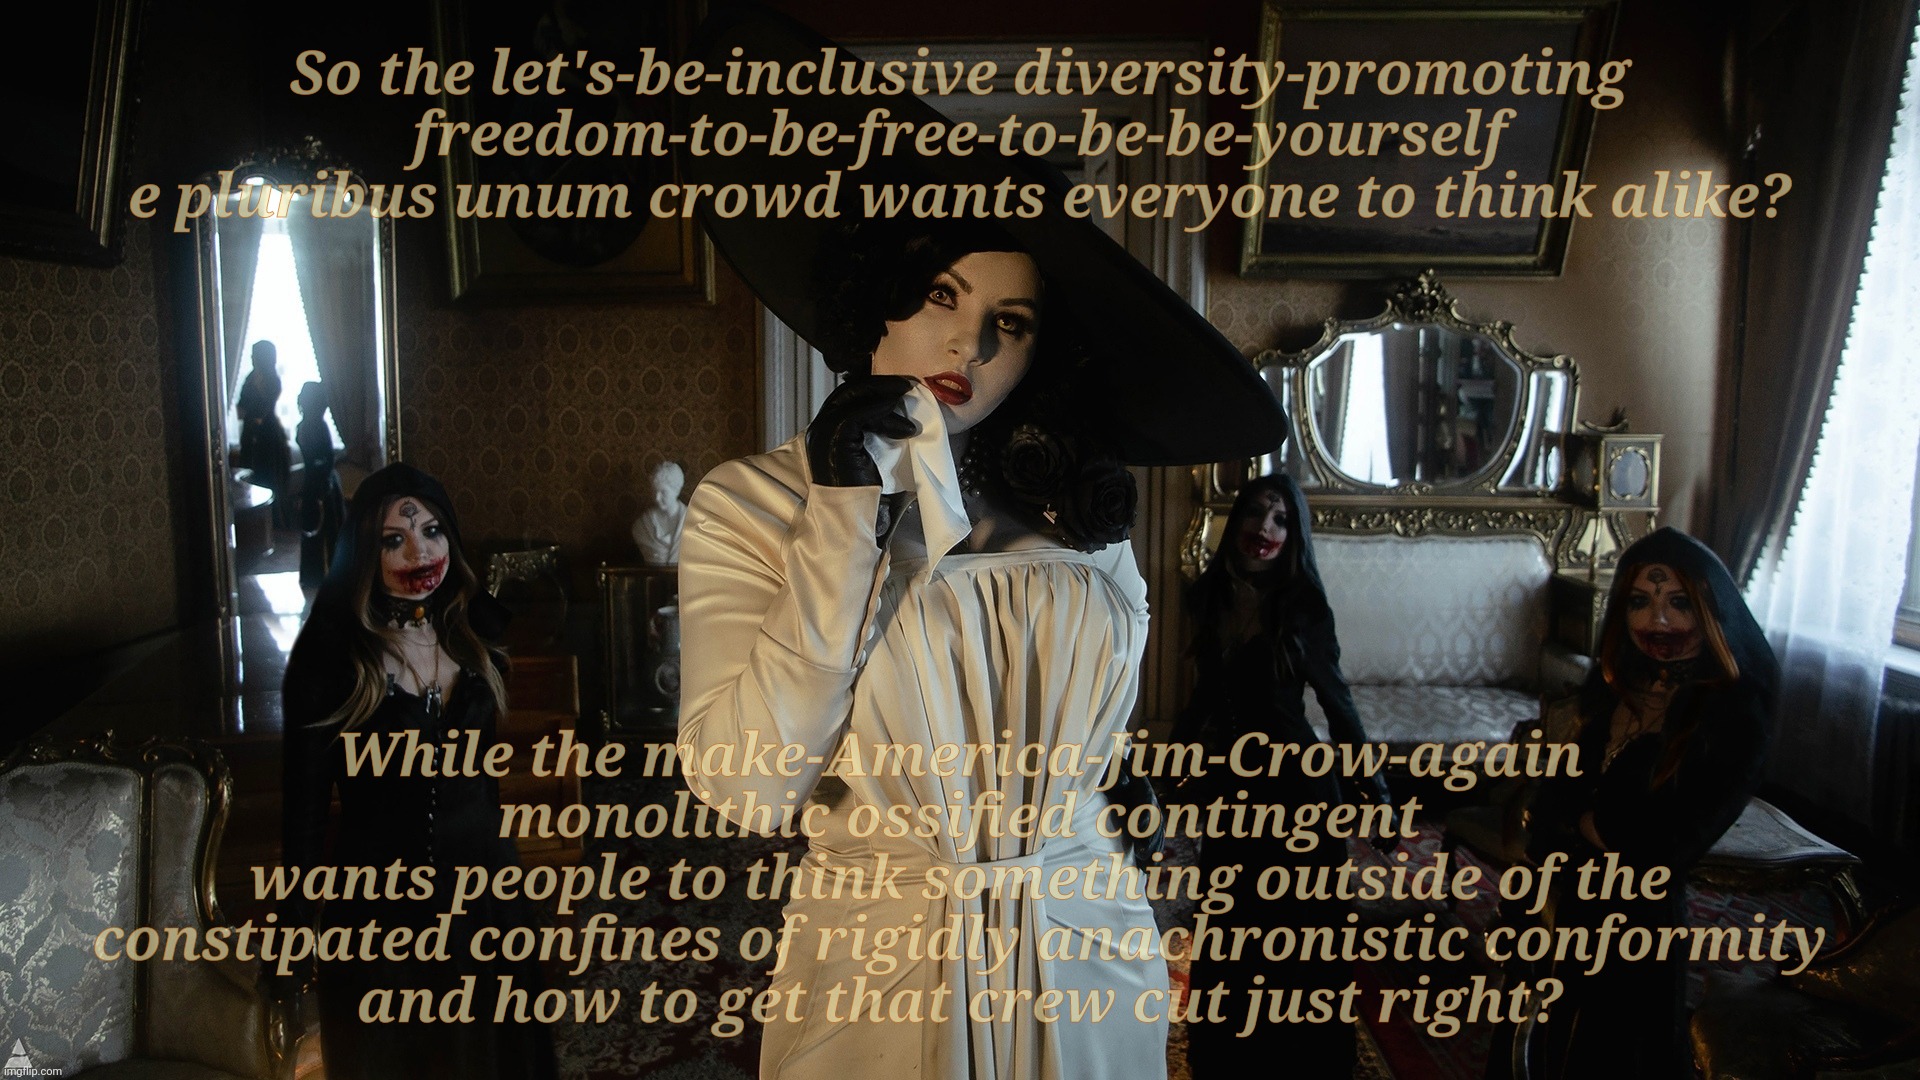 Freedom to be You vs Freedom to be a Clone | So the let's-be-inclusive diversity-promoting
freedom-to-be-free-to-be-be-yourself
e pluribus unum crowd wants everyone to think alike? Whil | image tagged in lady dimitrescu and daughters,diversity,e pluribus unum,vs,clones,conformity | made w/ Imgflip meme maker